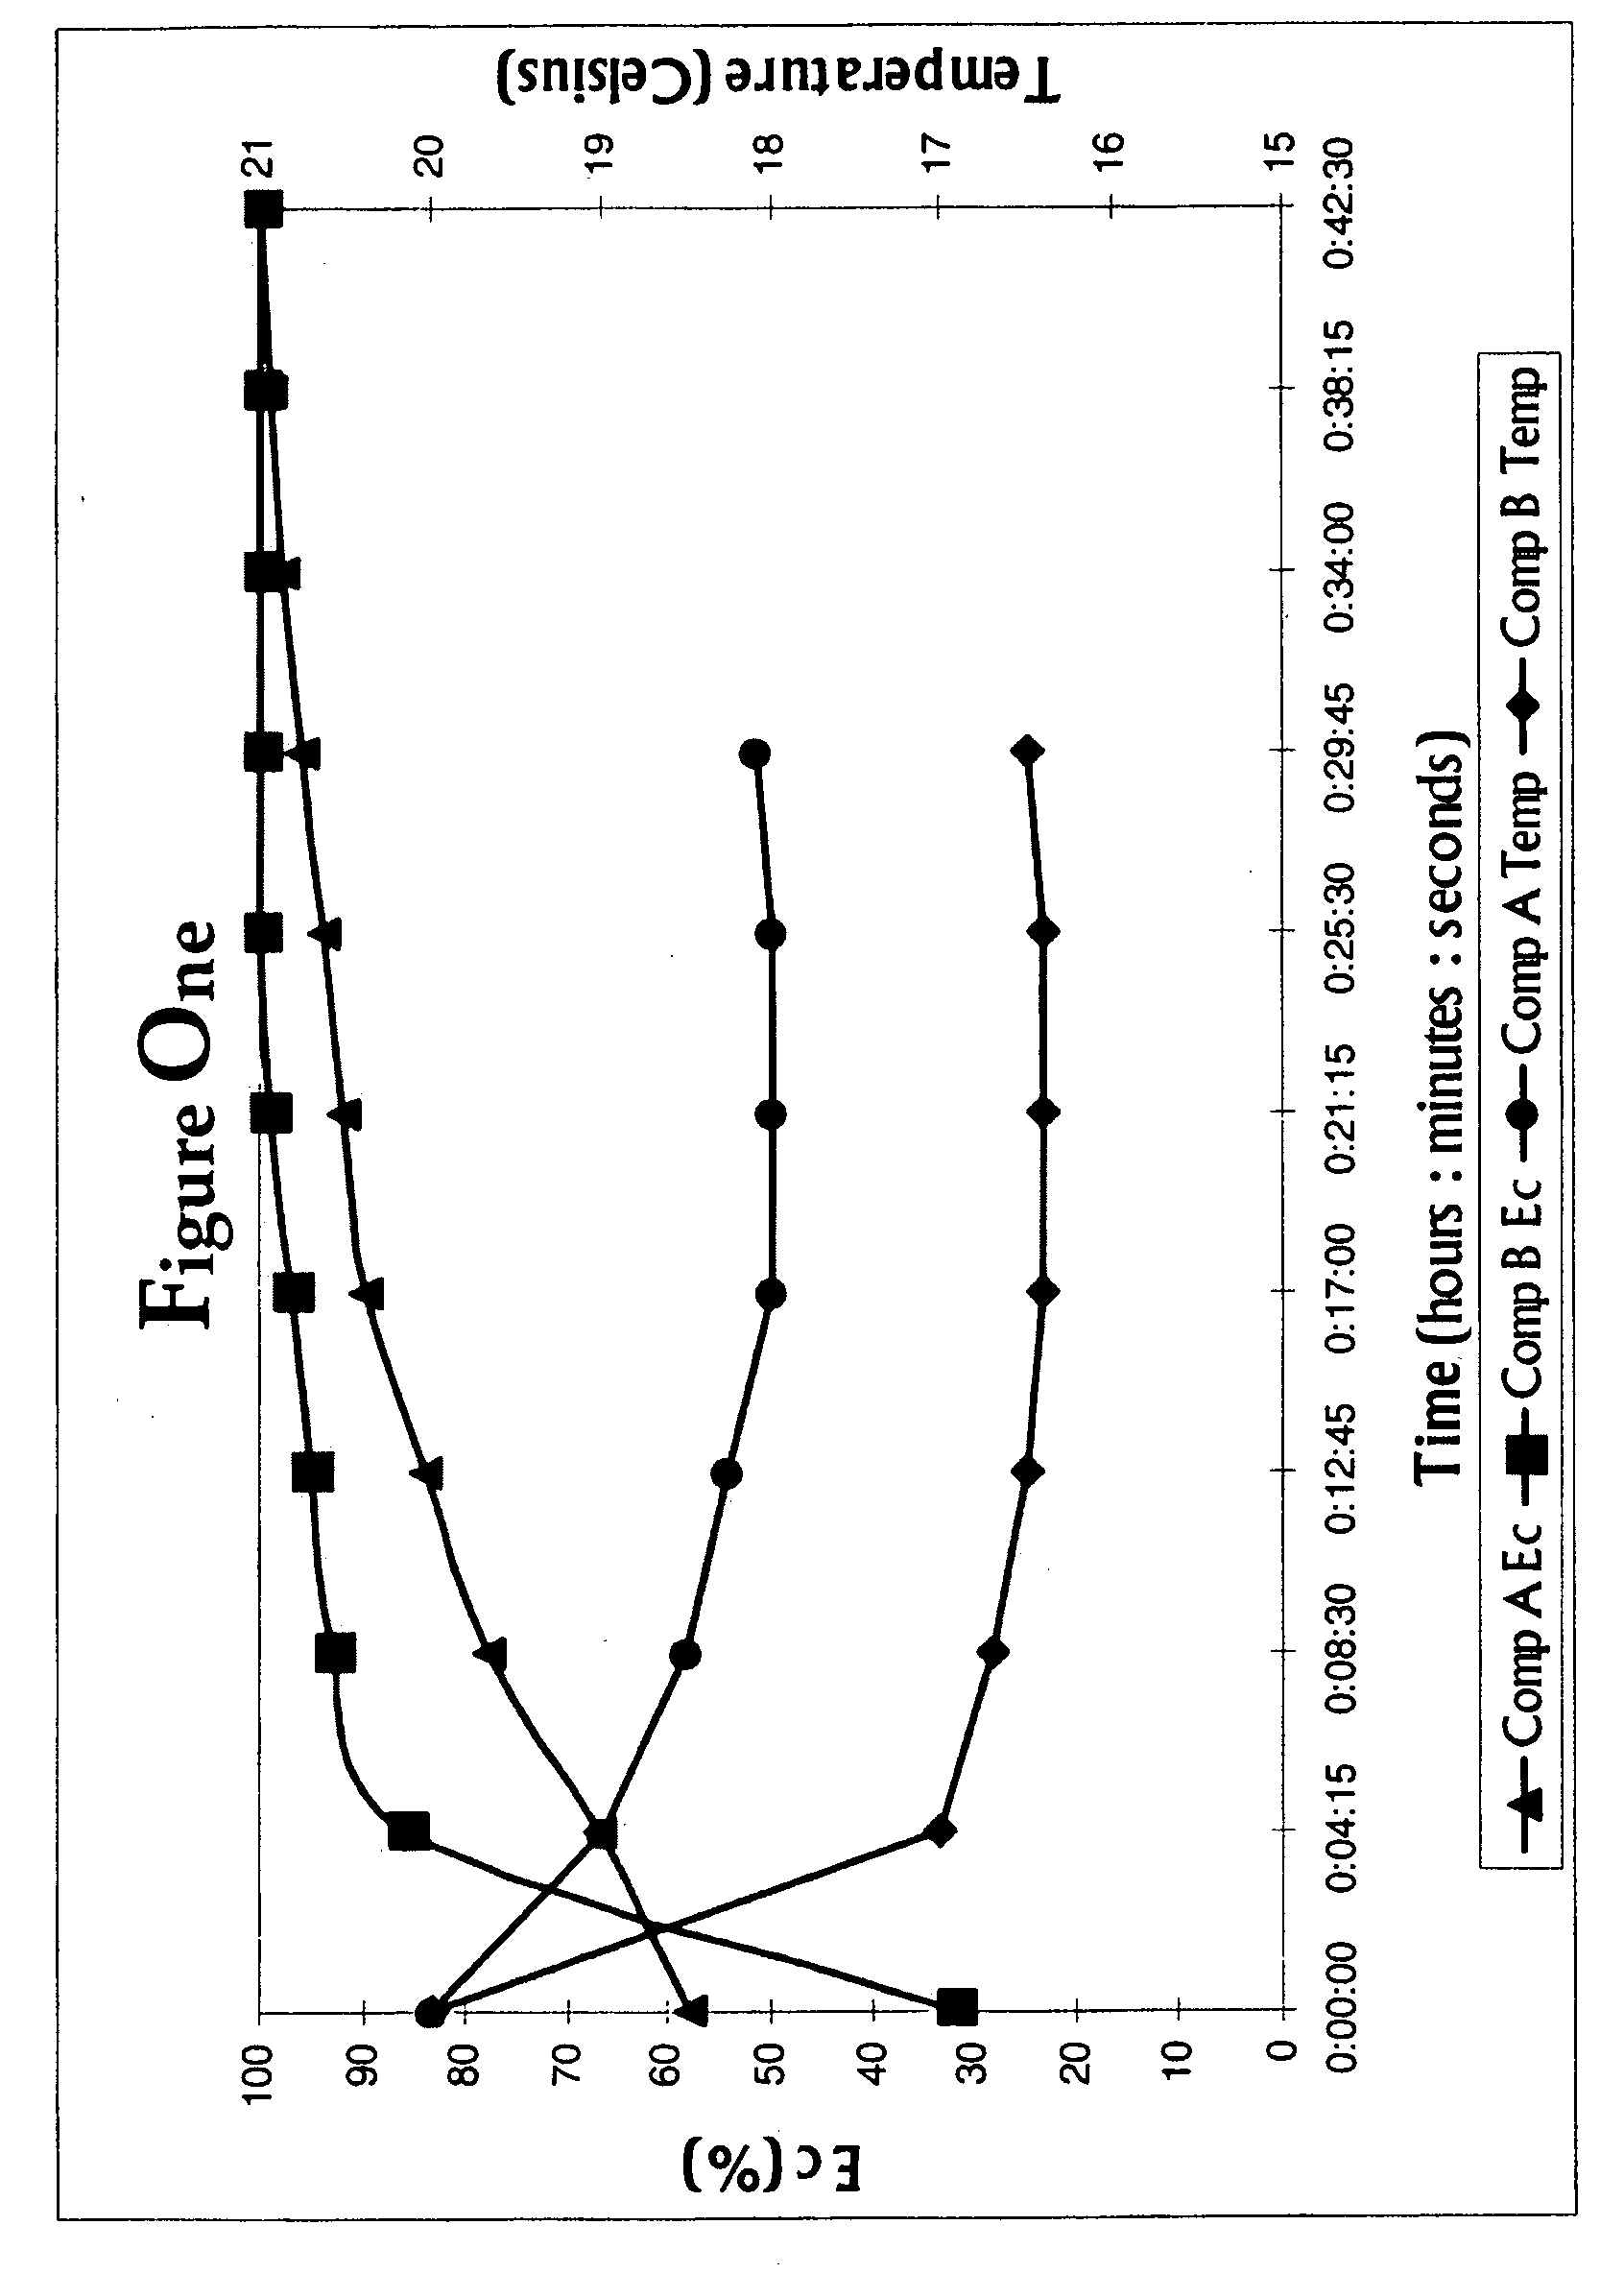 Fast dissolving water-soluble fertilizer formulations and methods and uses thereof